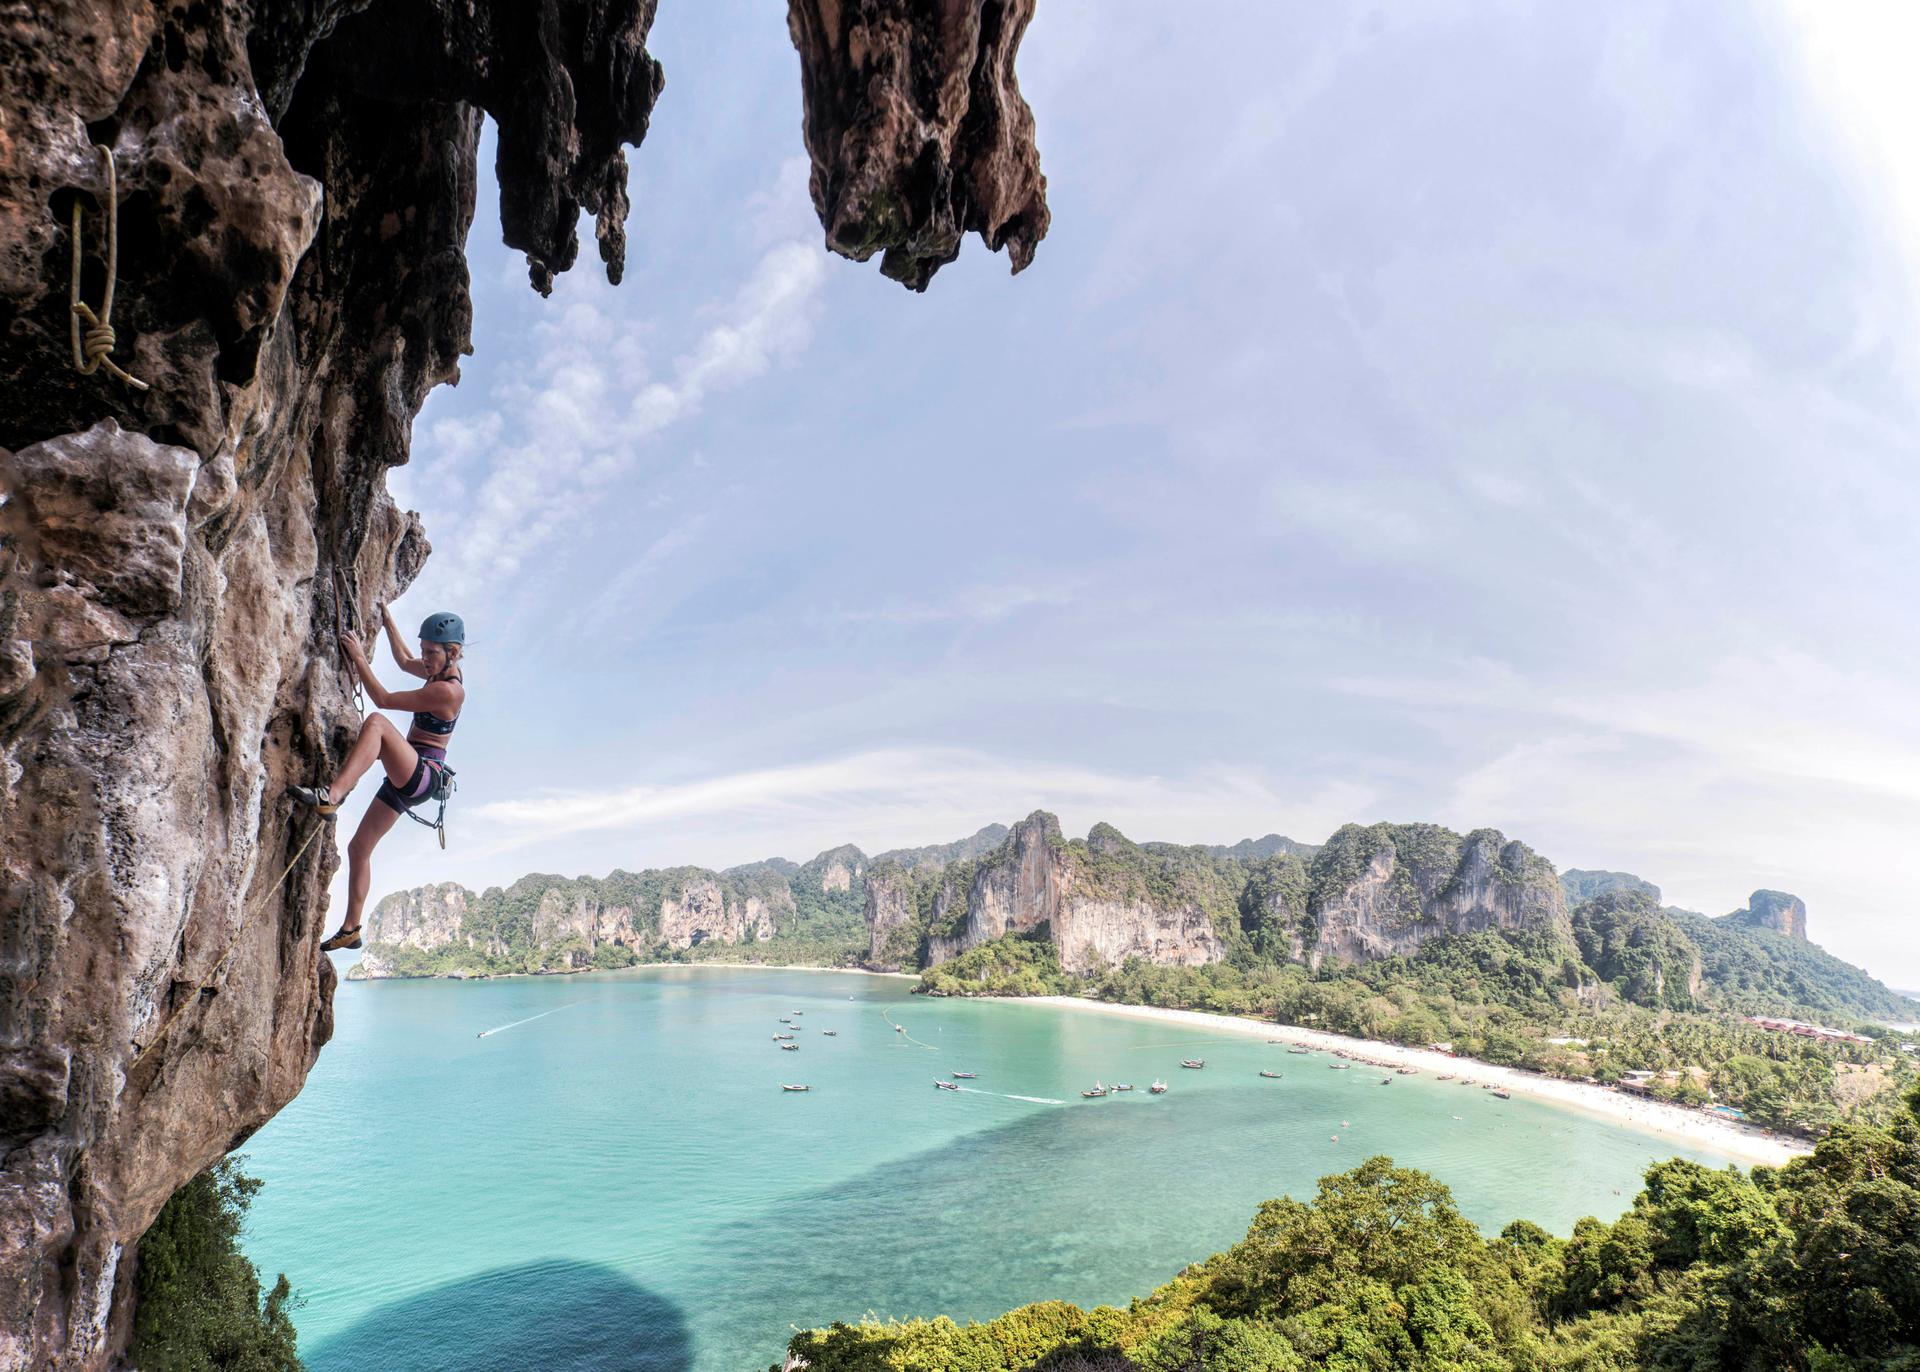 A rock climber scales a sheer rock face in Krabi, Thailand. In the background is a sweeping view of a white-sand beach and turquoise sea.